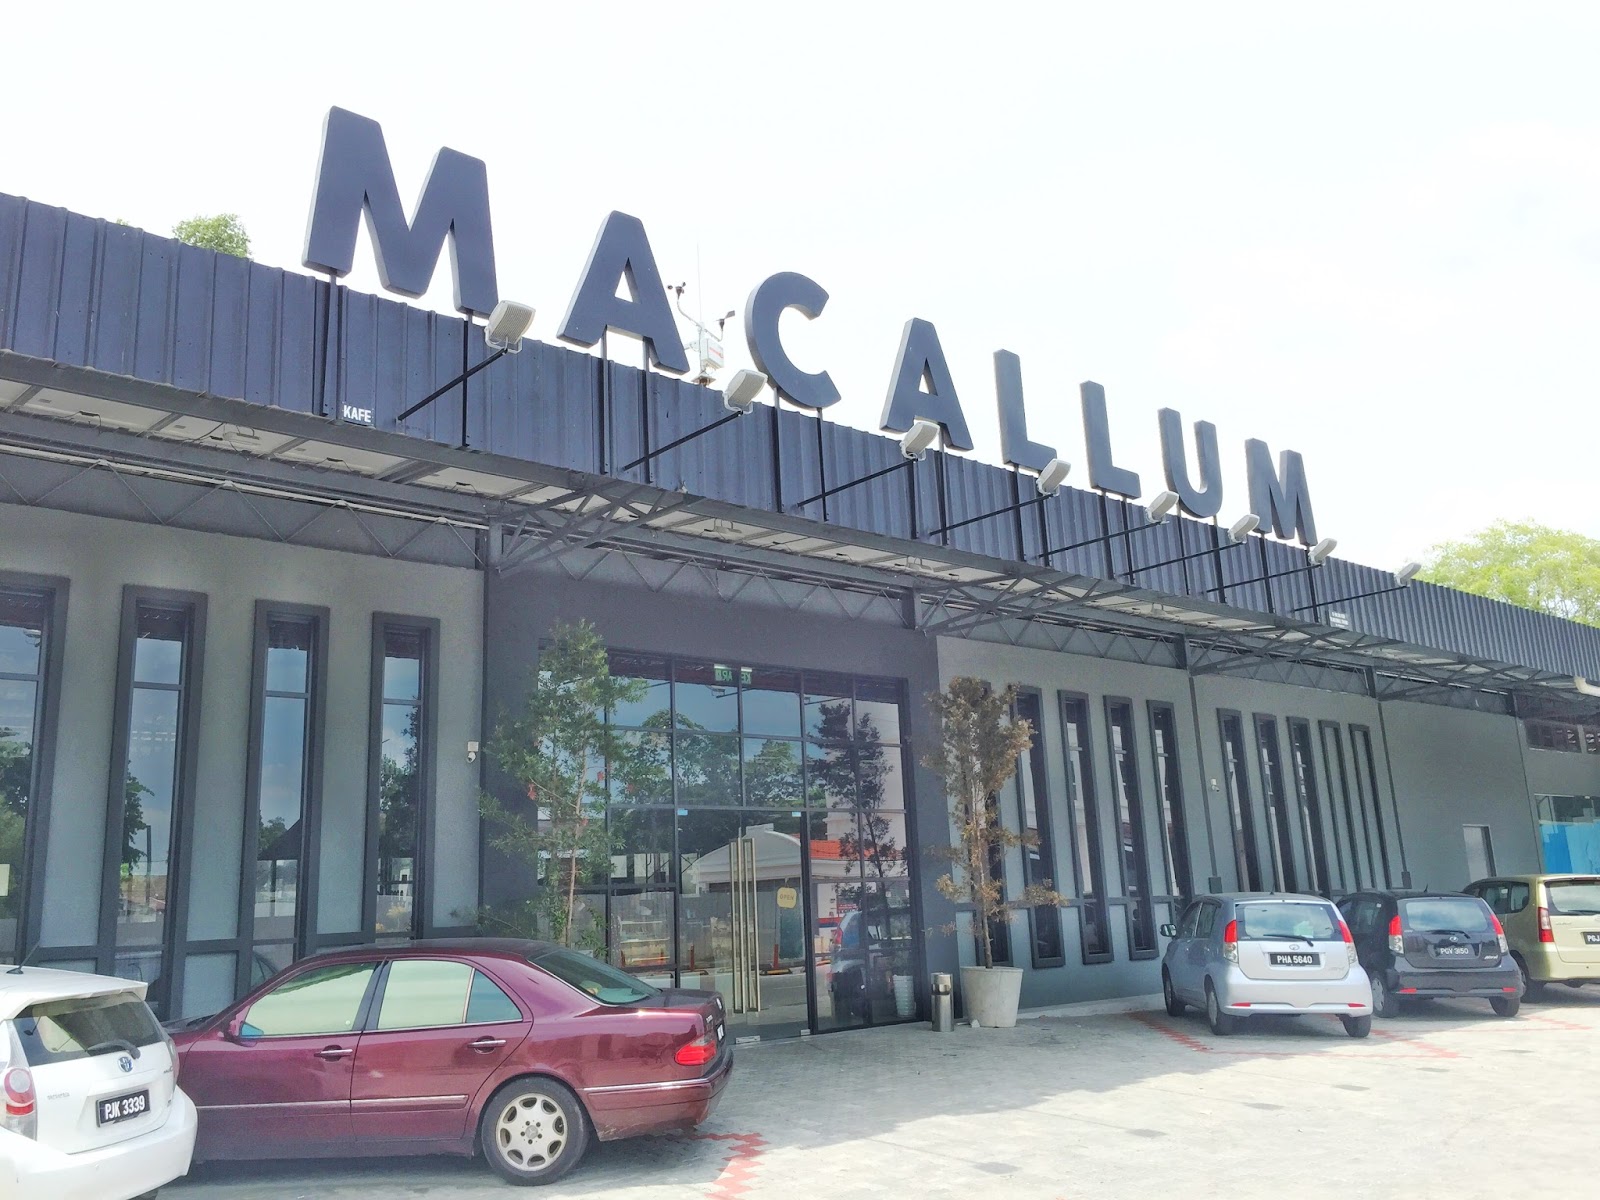 Penang Cafes - Macallum Connoisseurs Coffee Company